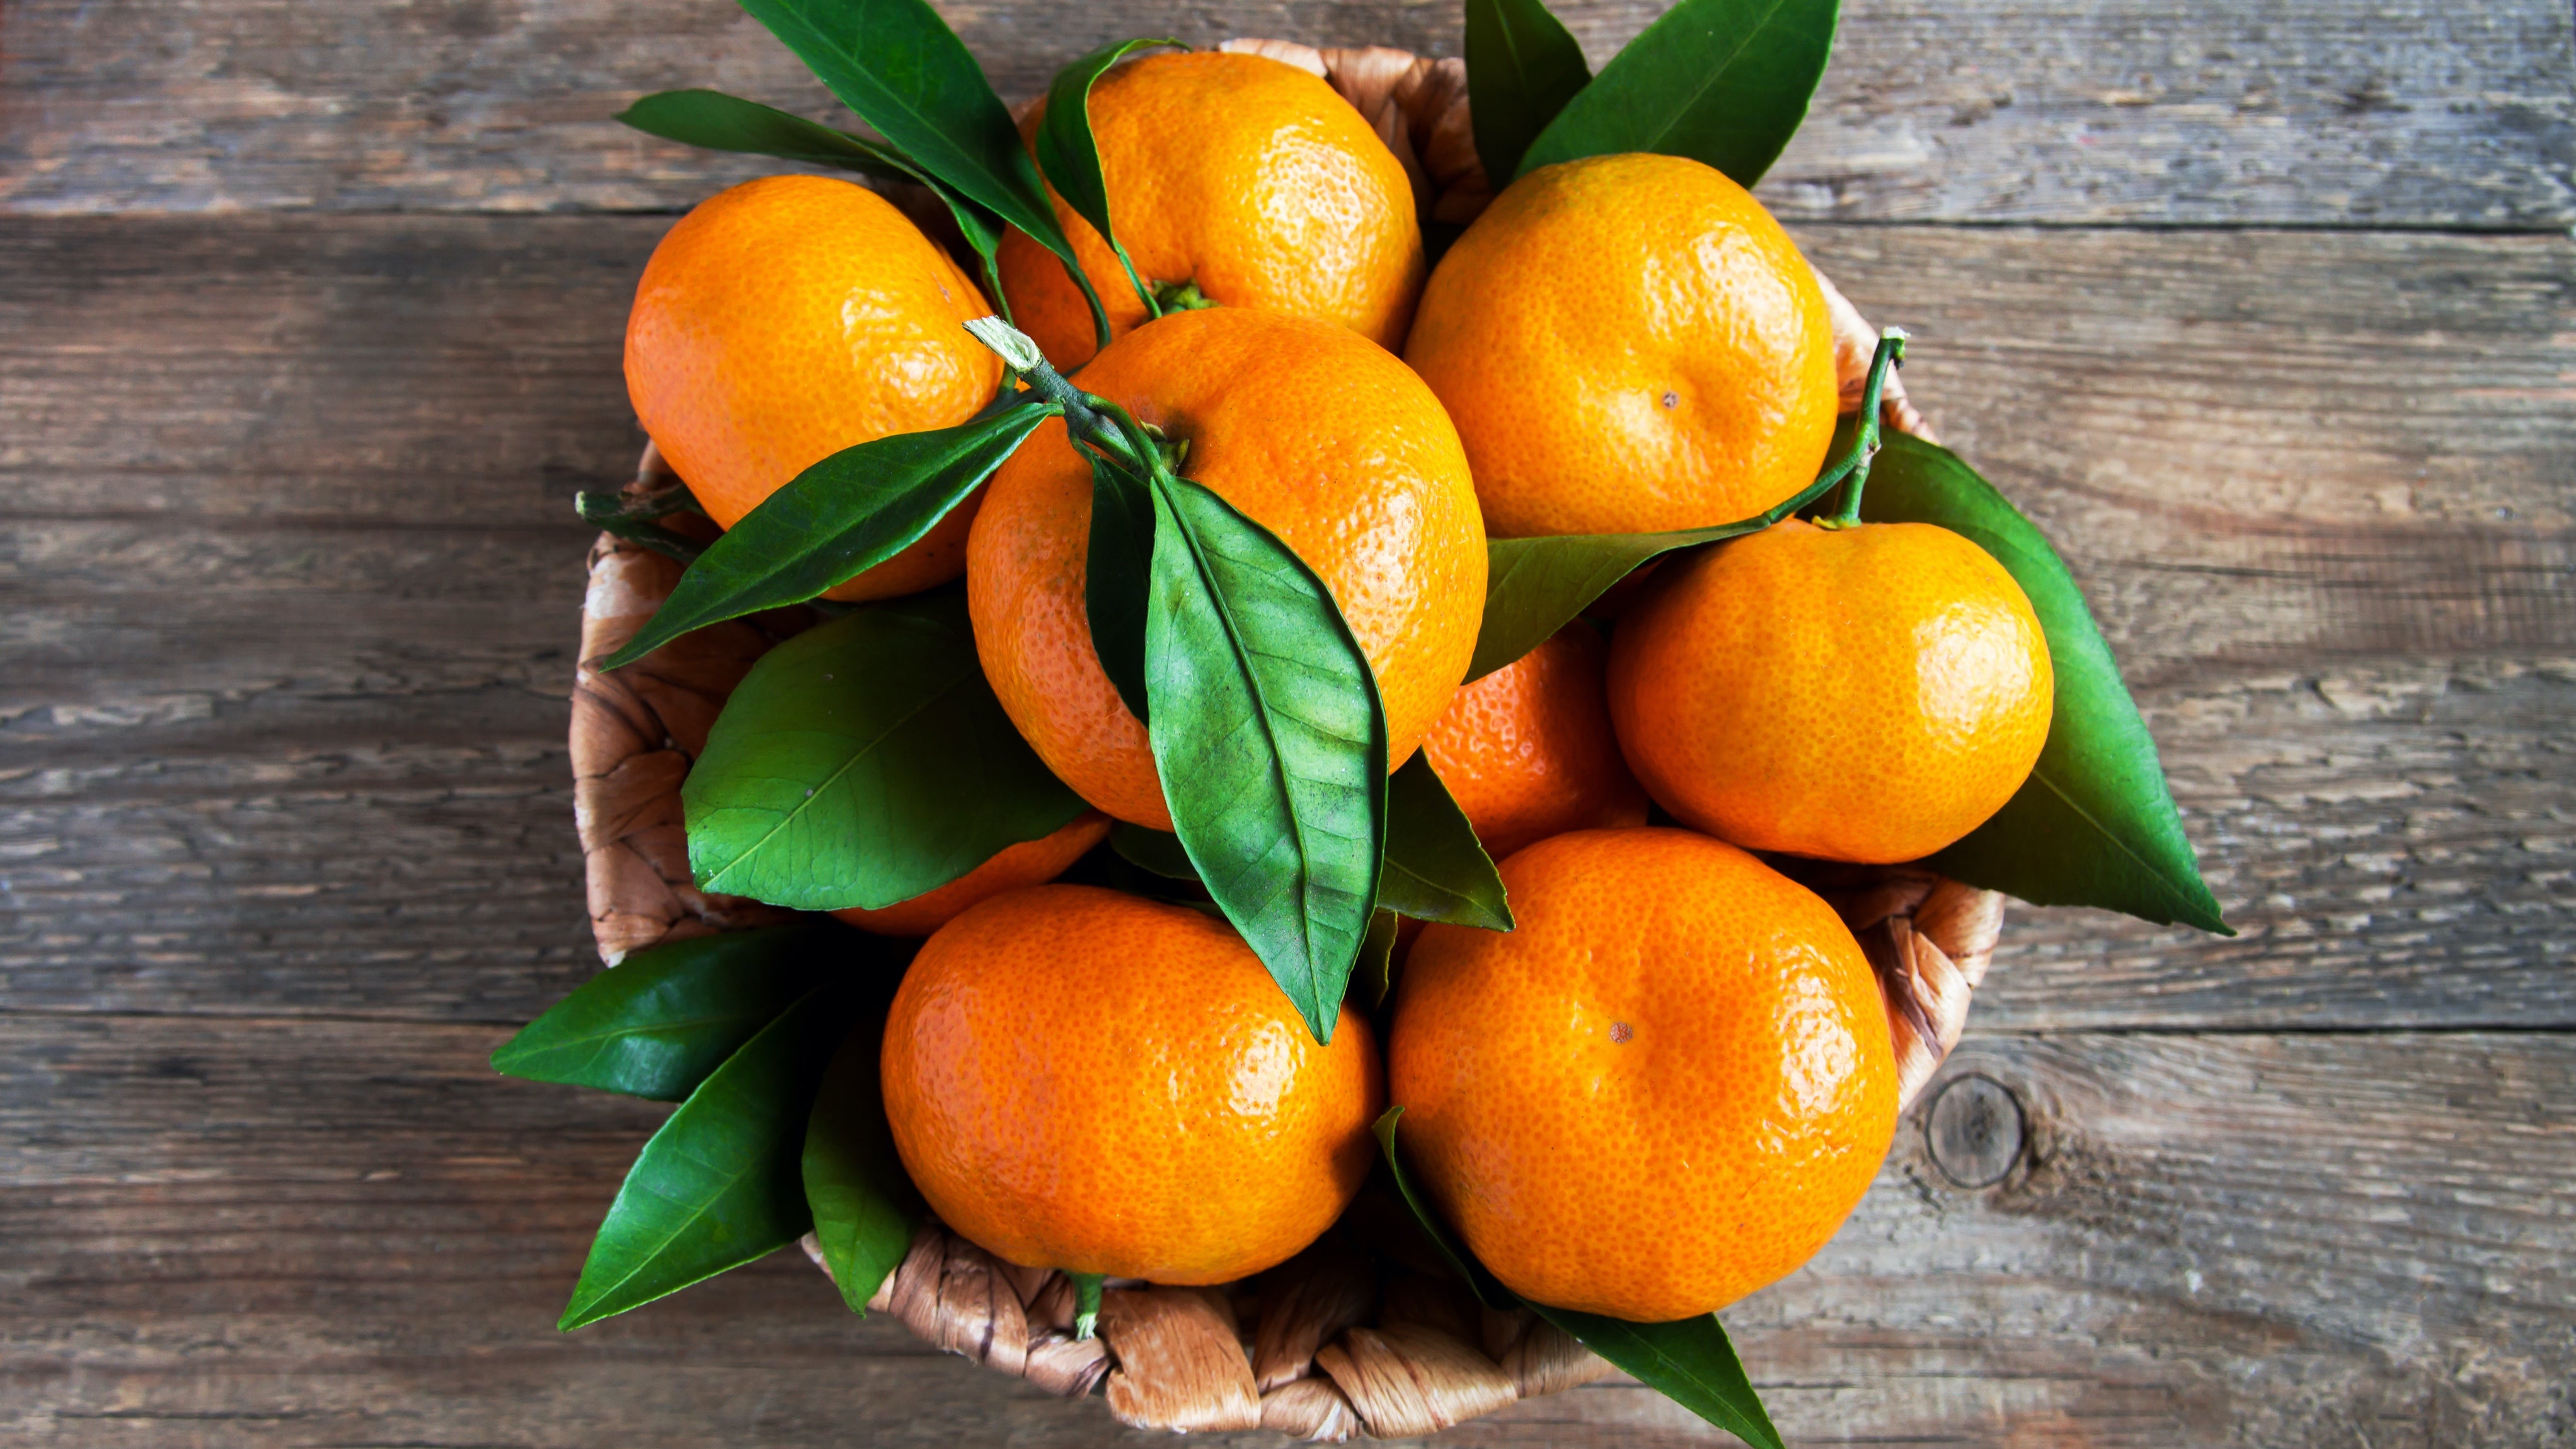 You Need A Bowl Of Oranges These Holidays